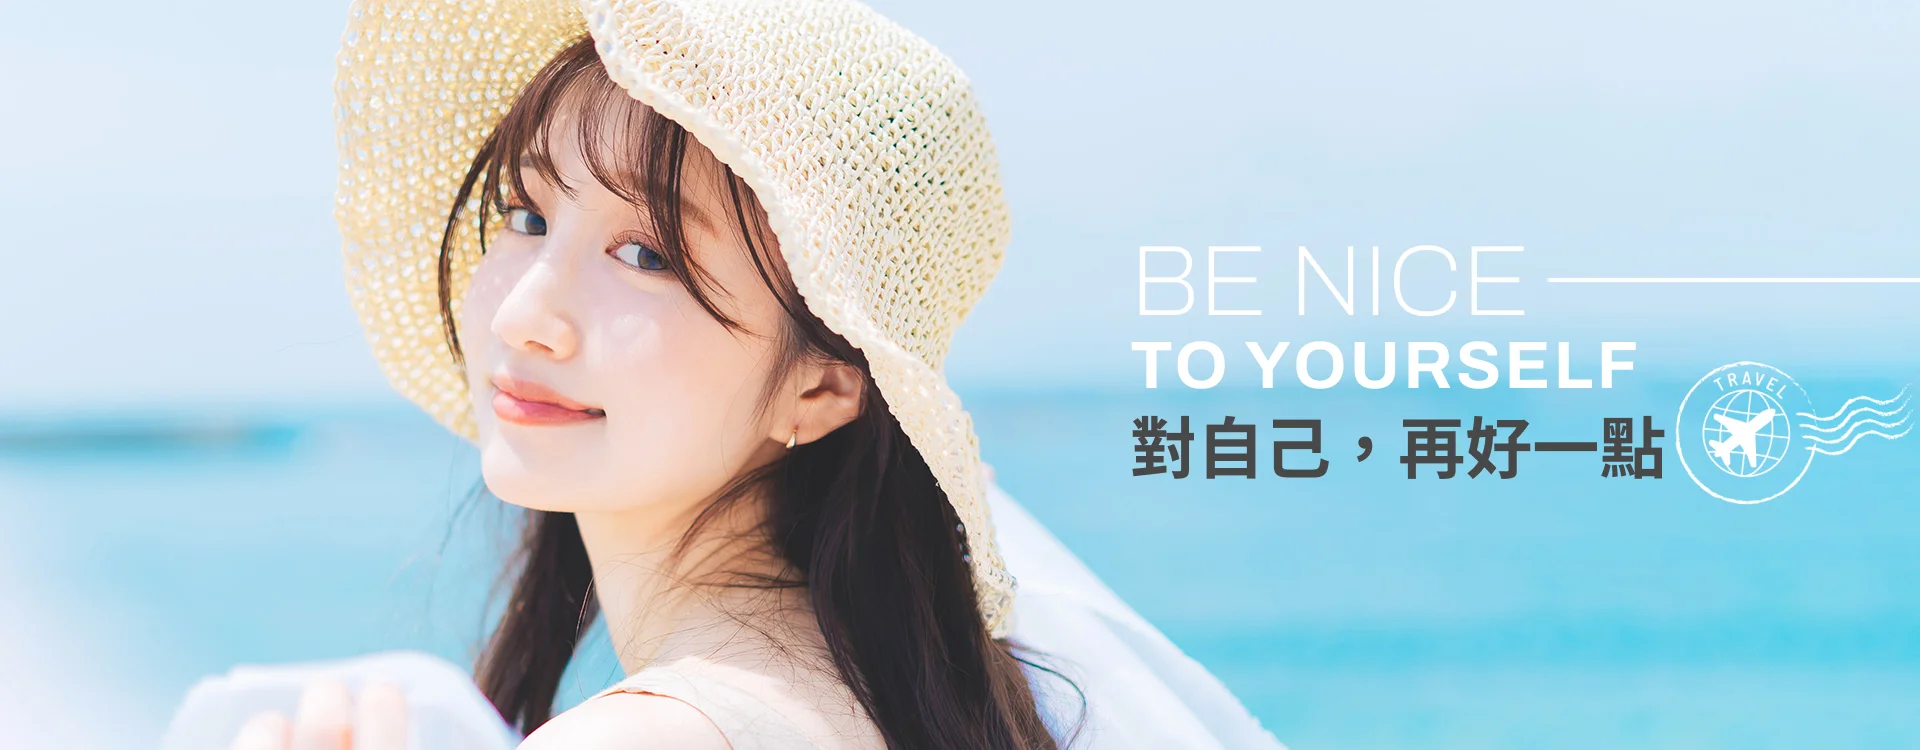 Overseas Banner - Be nice to your self